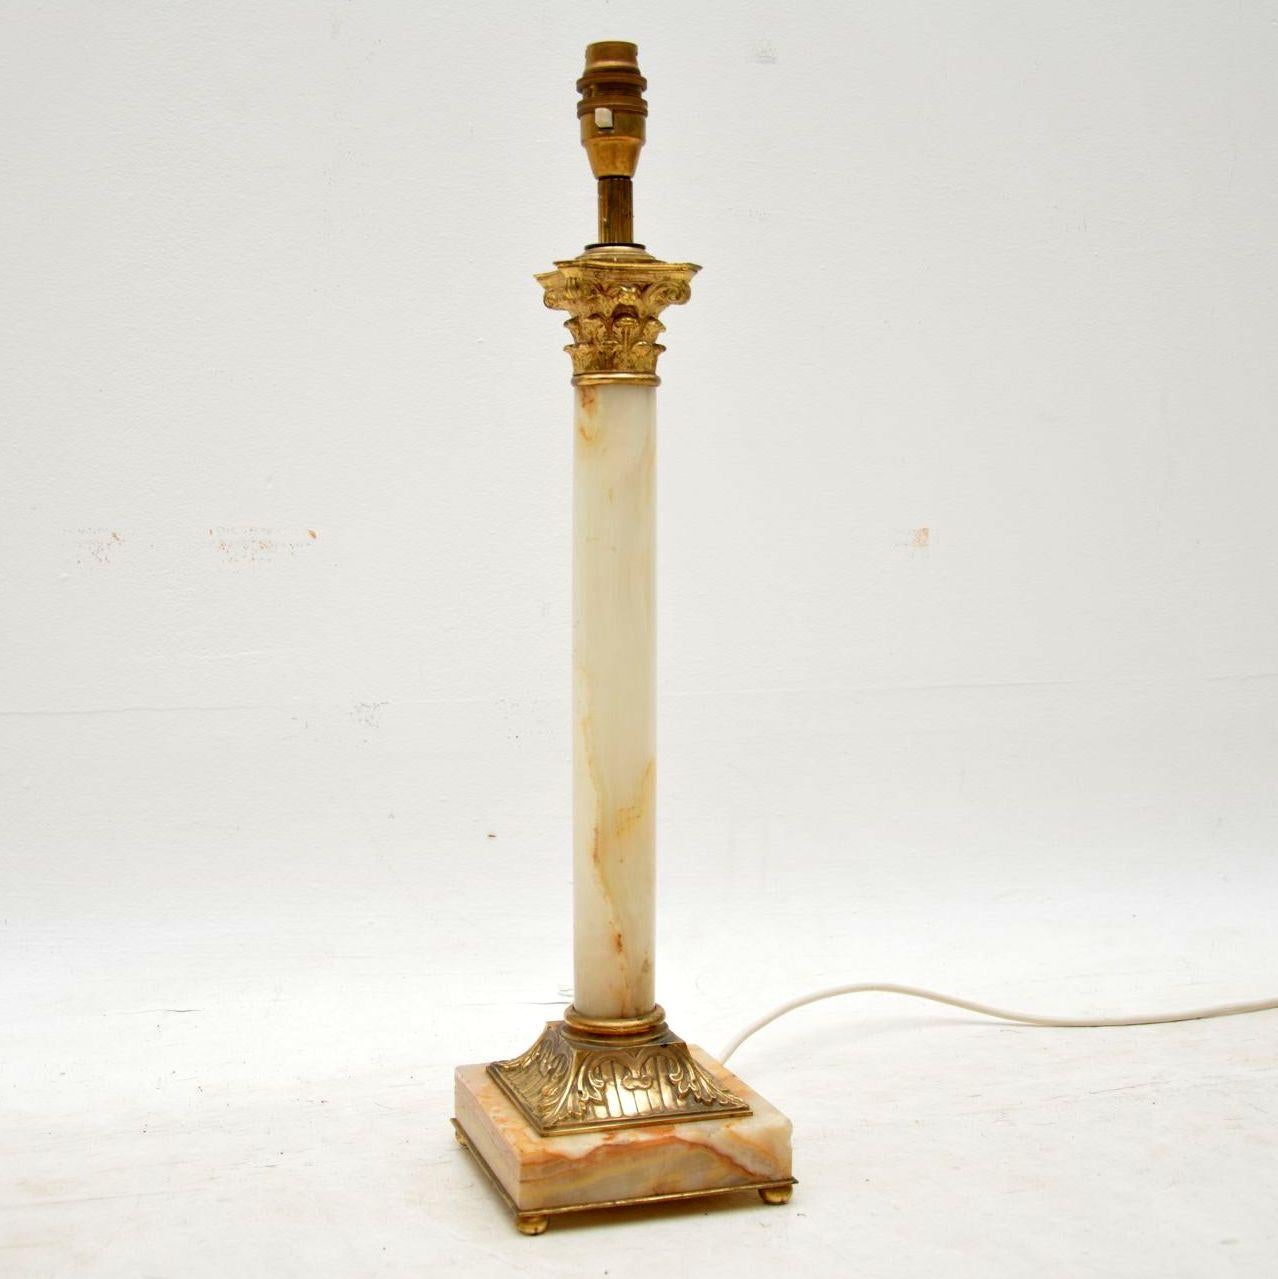 Antique marble and gilt bronze table lamp in a neoclassical style and in excellent condition. It’s just been re-wired and I would date this lamp to around the 1910-1920s period. The gilt bronze parts have some Fine intricate details on the base part